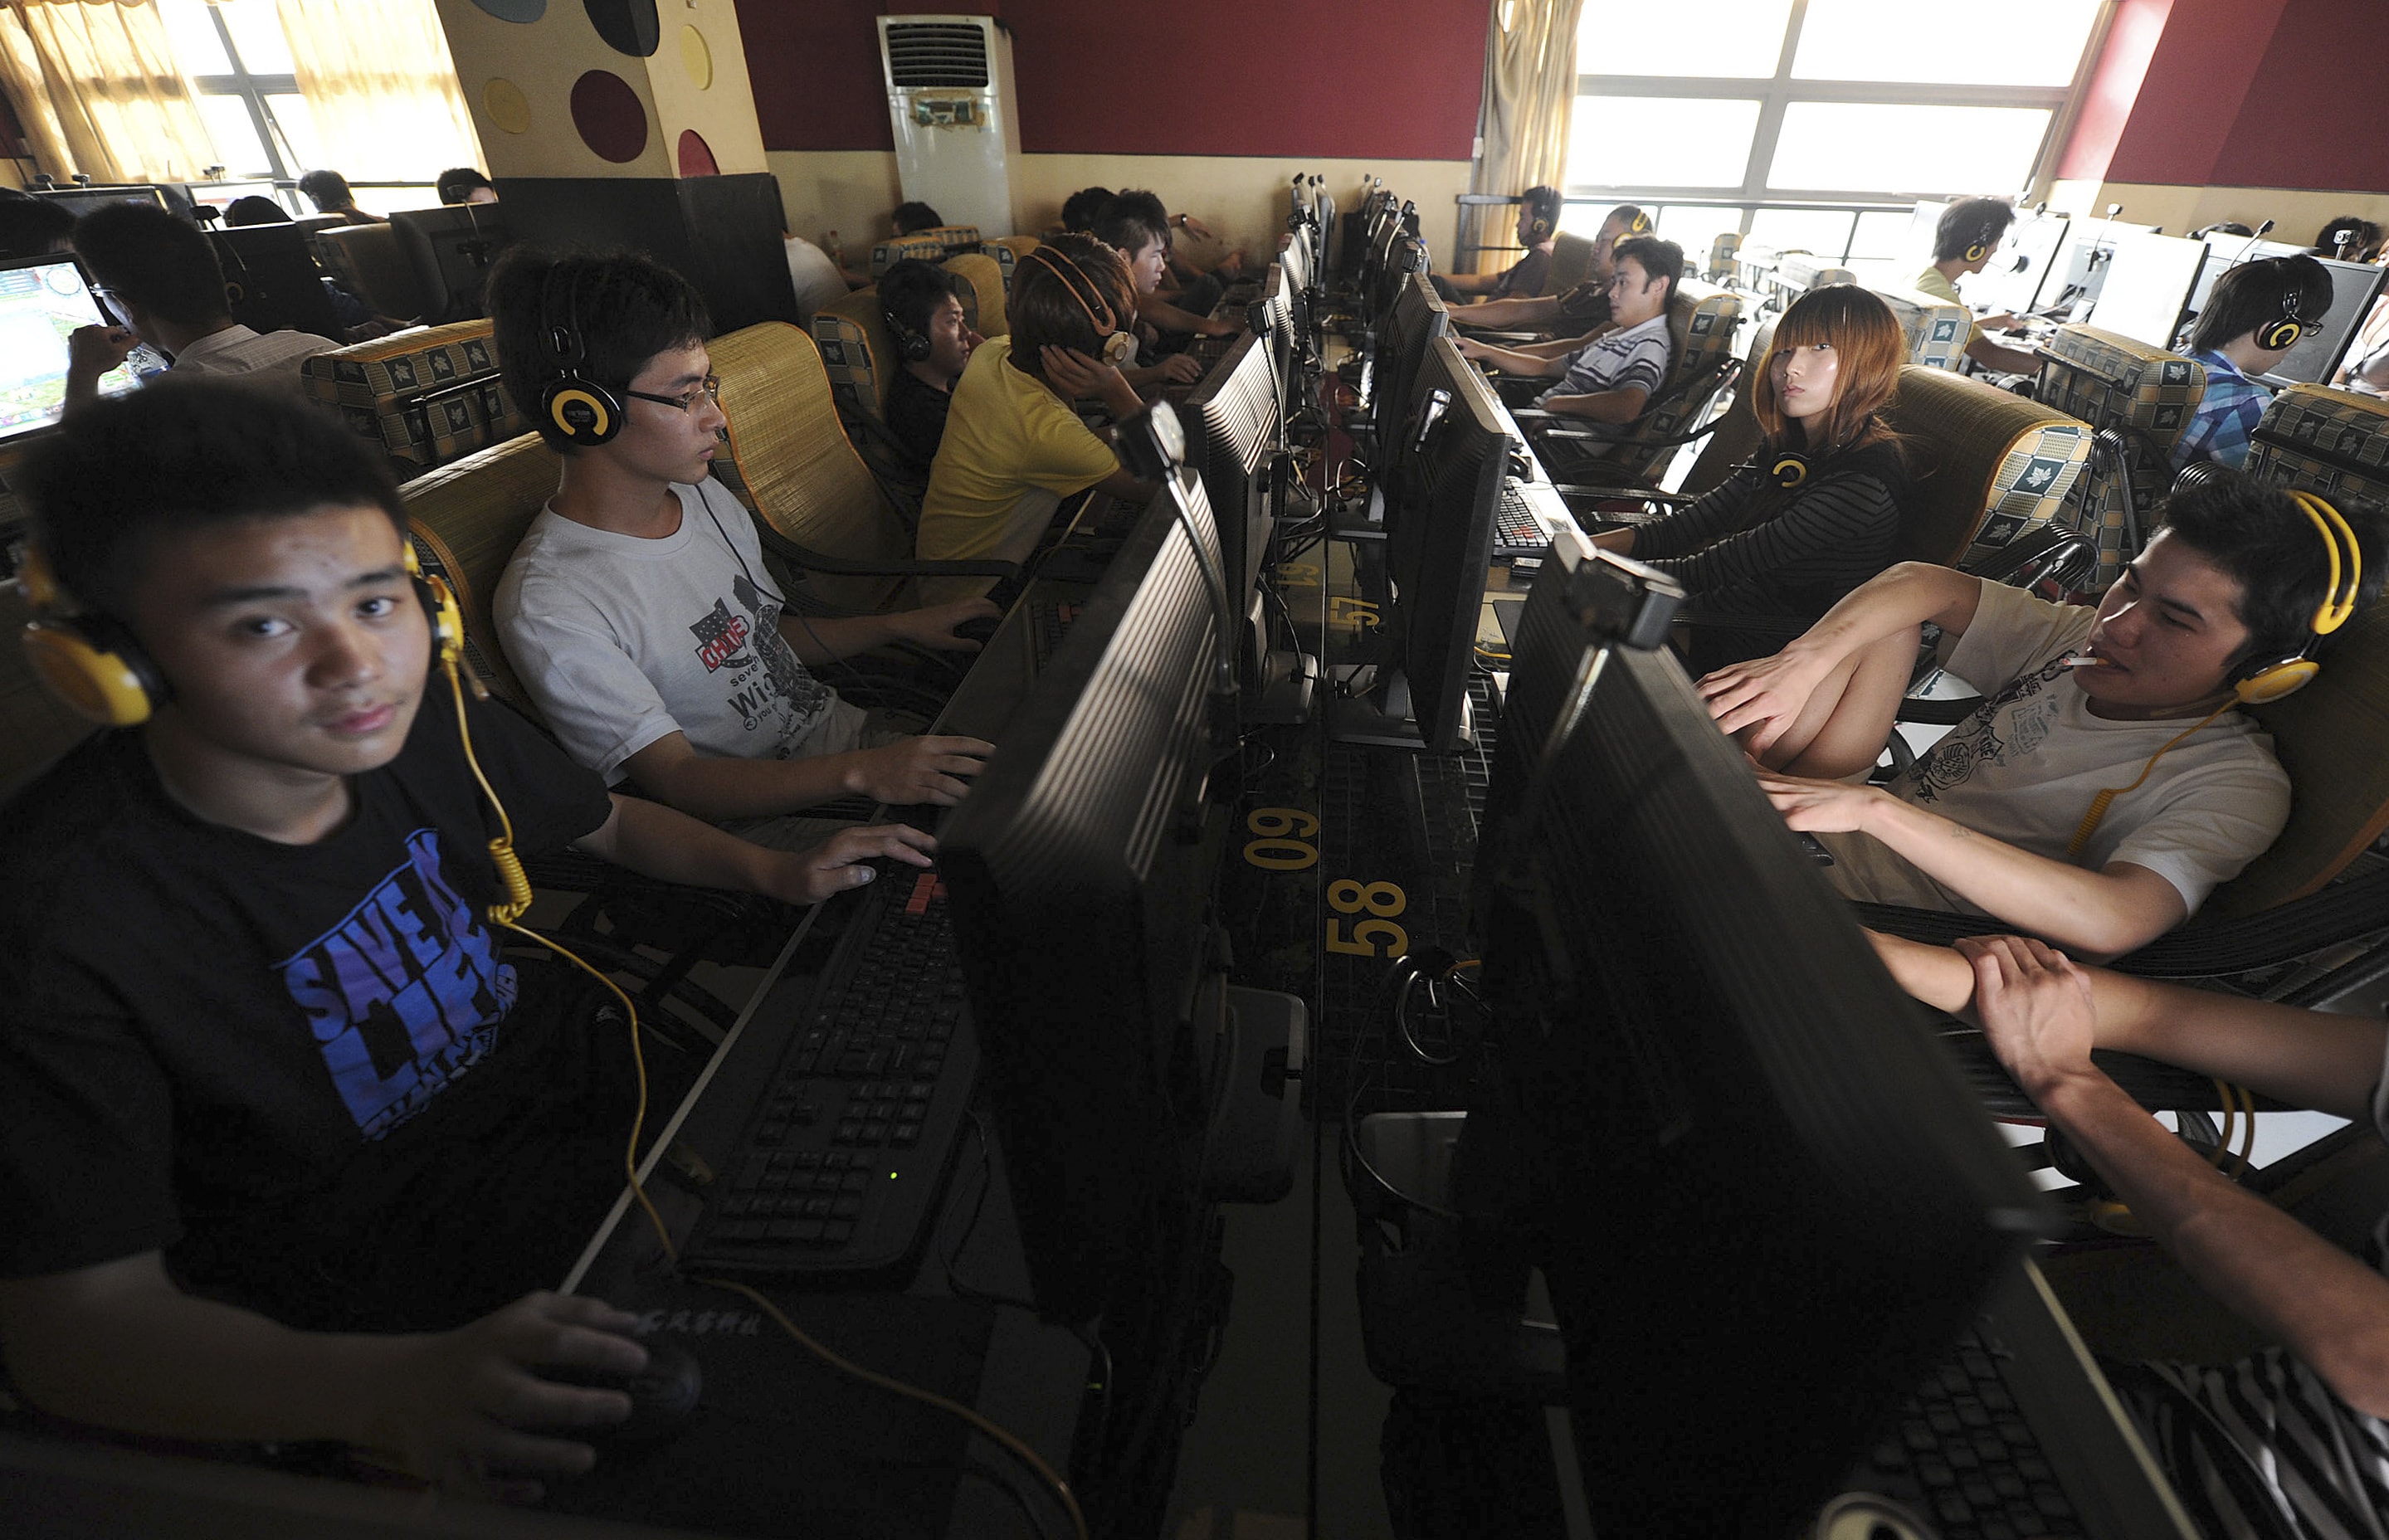 eople use computers at an internet cafe in Hefei, Anhui province, 15 September 2011, REUTERS/Stringer